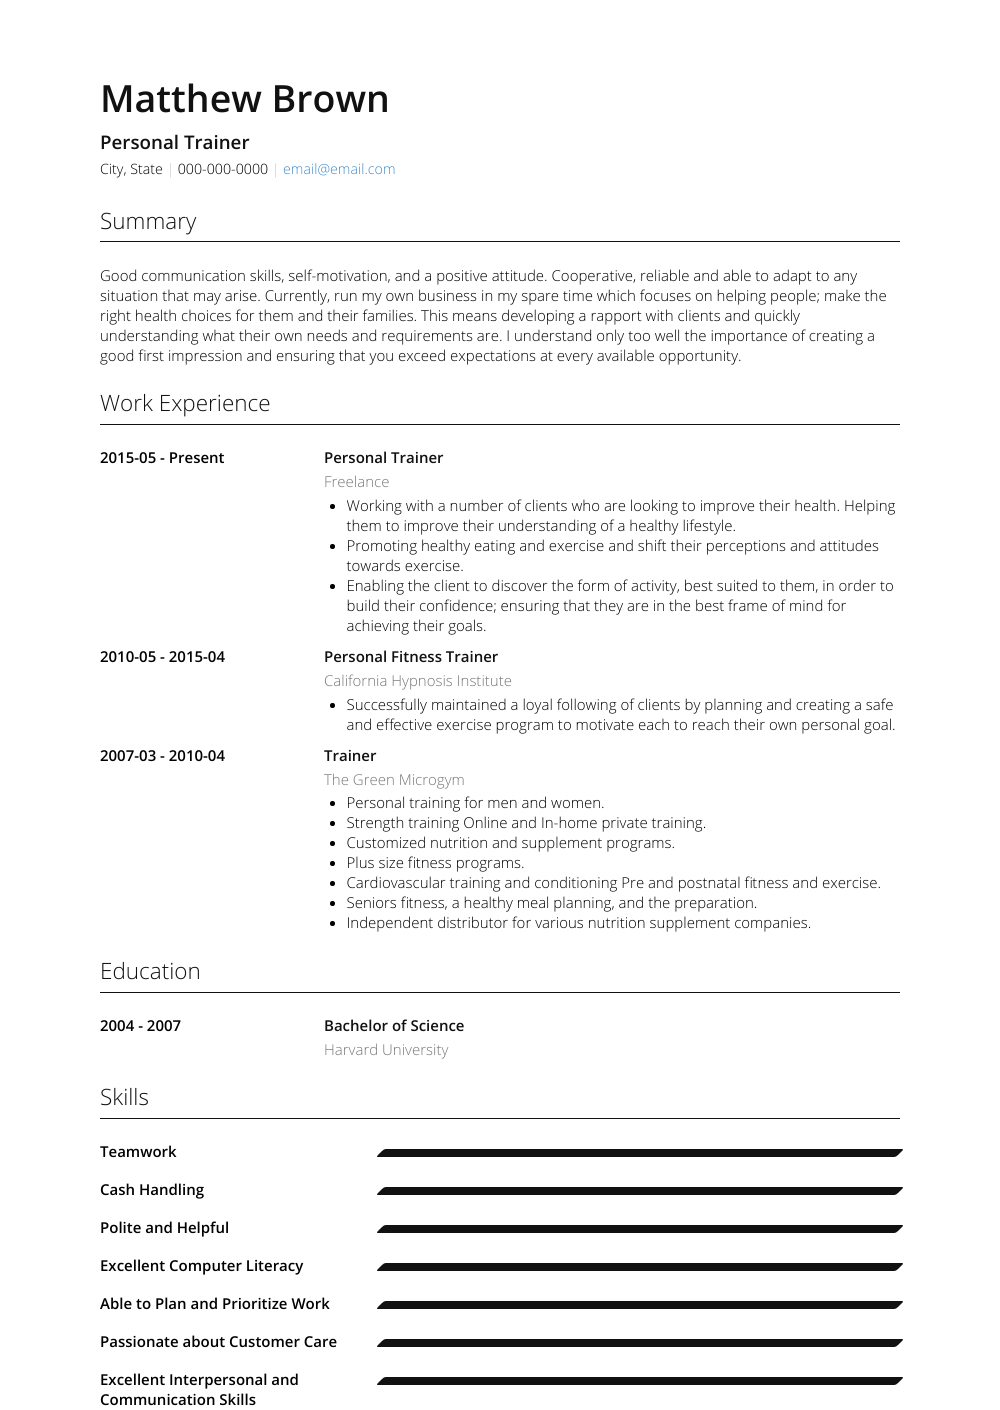 Personal Trainer  Resume Samples  Templates  Visualcv intended for Personal Training Cancellation Policy Template